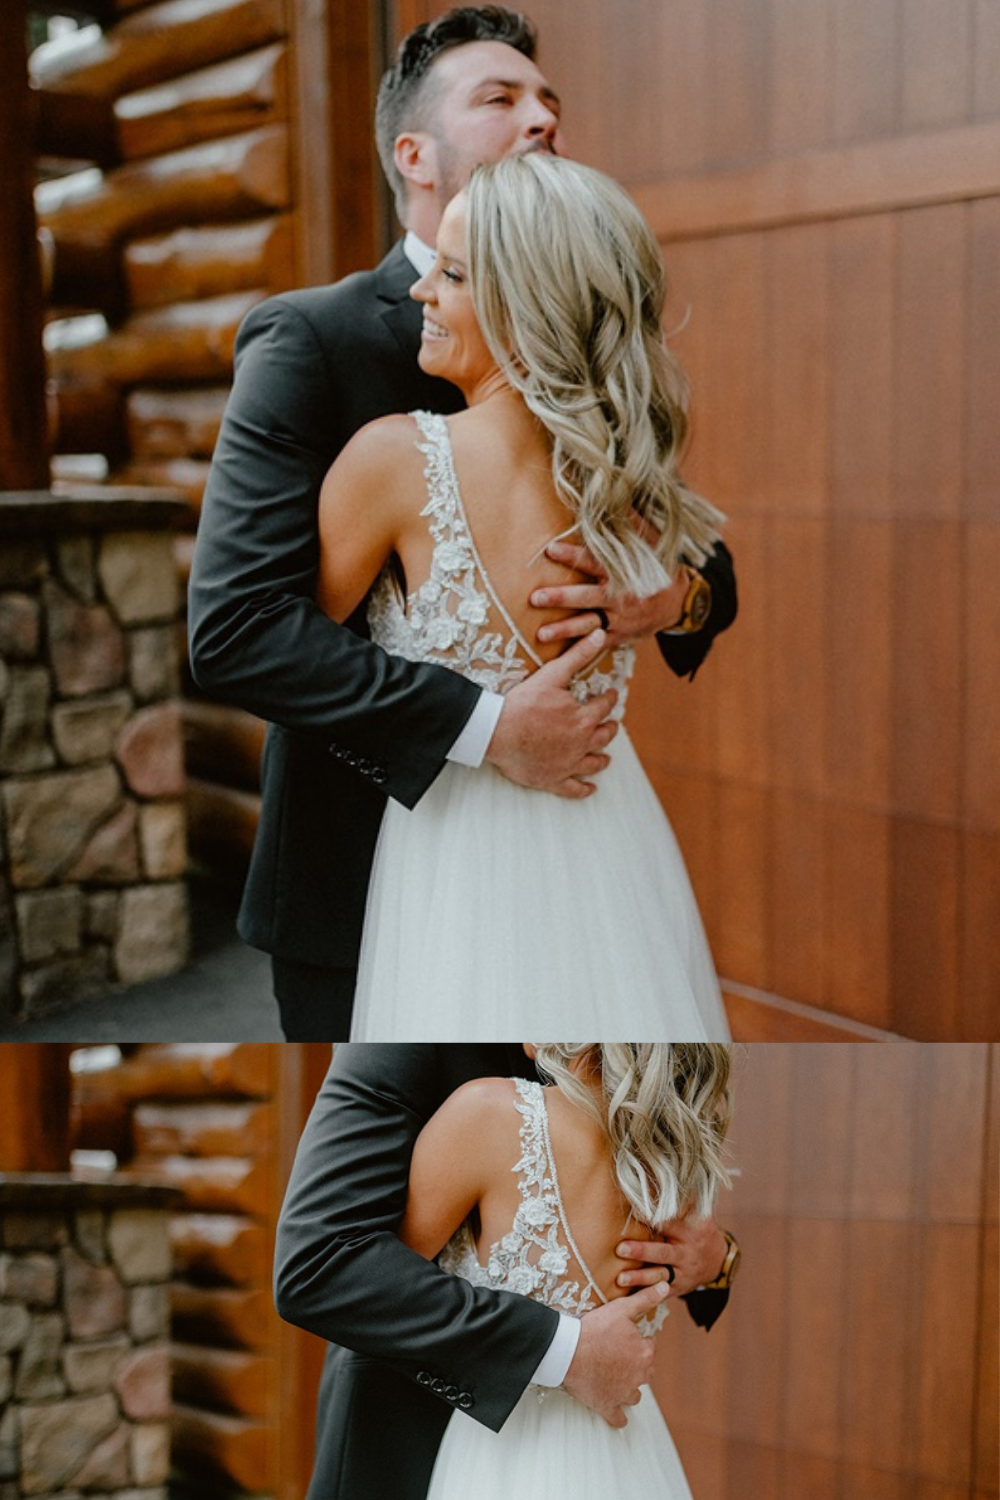 Bride and groom embrace wearing wedding day attire inspiration with lace accents and black suit for groom style pre-ceremony wedding ideas | Sun River Elopement, Destination Elopement Photographer, Smith Rock Elopement Inspiration, Oregon Elopement ideas, PNW Fall Wedding Inspiration, Fall Outdoor Wedding Ideas,Fall Wedding Inspiration, PNW Outdoor Wedding Ideas | chelseaabril.com